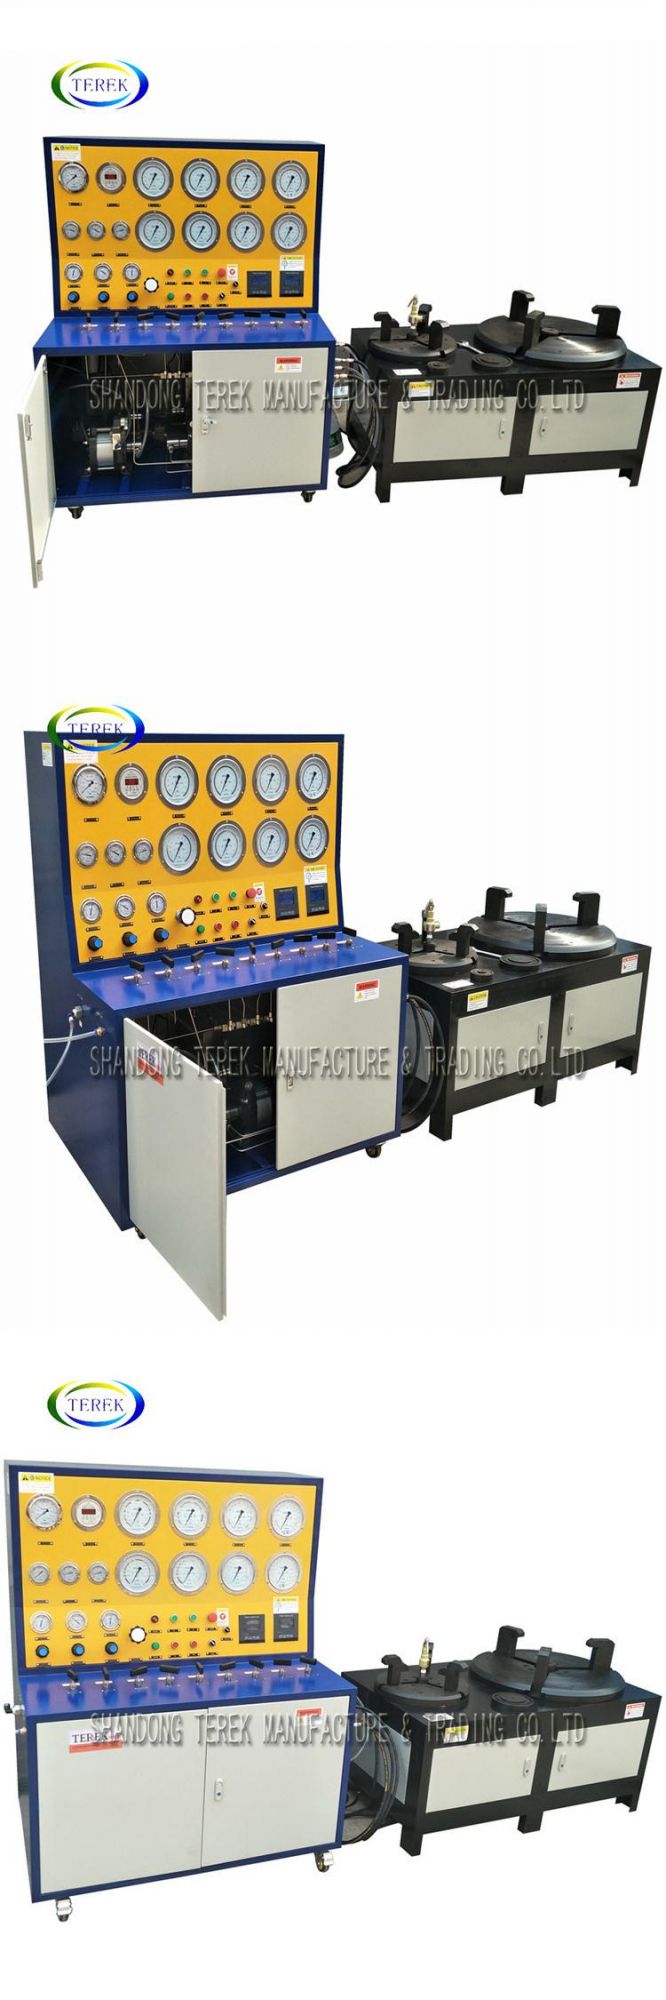 Computer Control Automatic Pneumatic Safety Relief Valve Test Bench for Valves Manufacturer